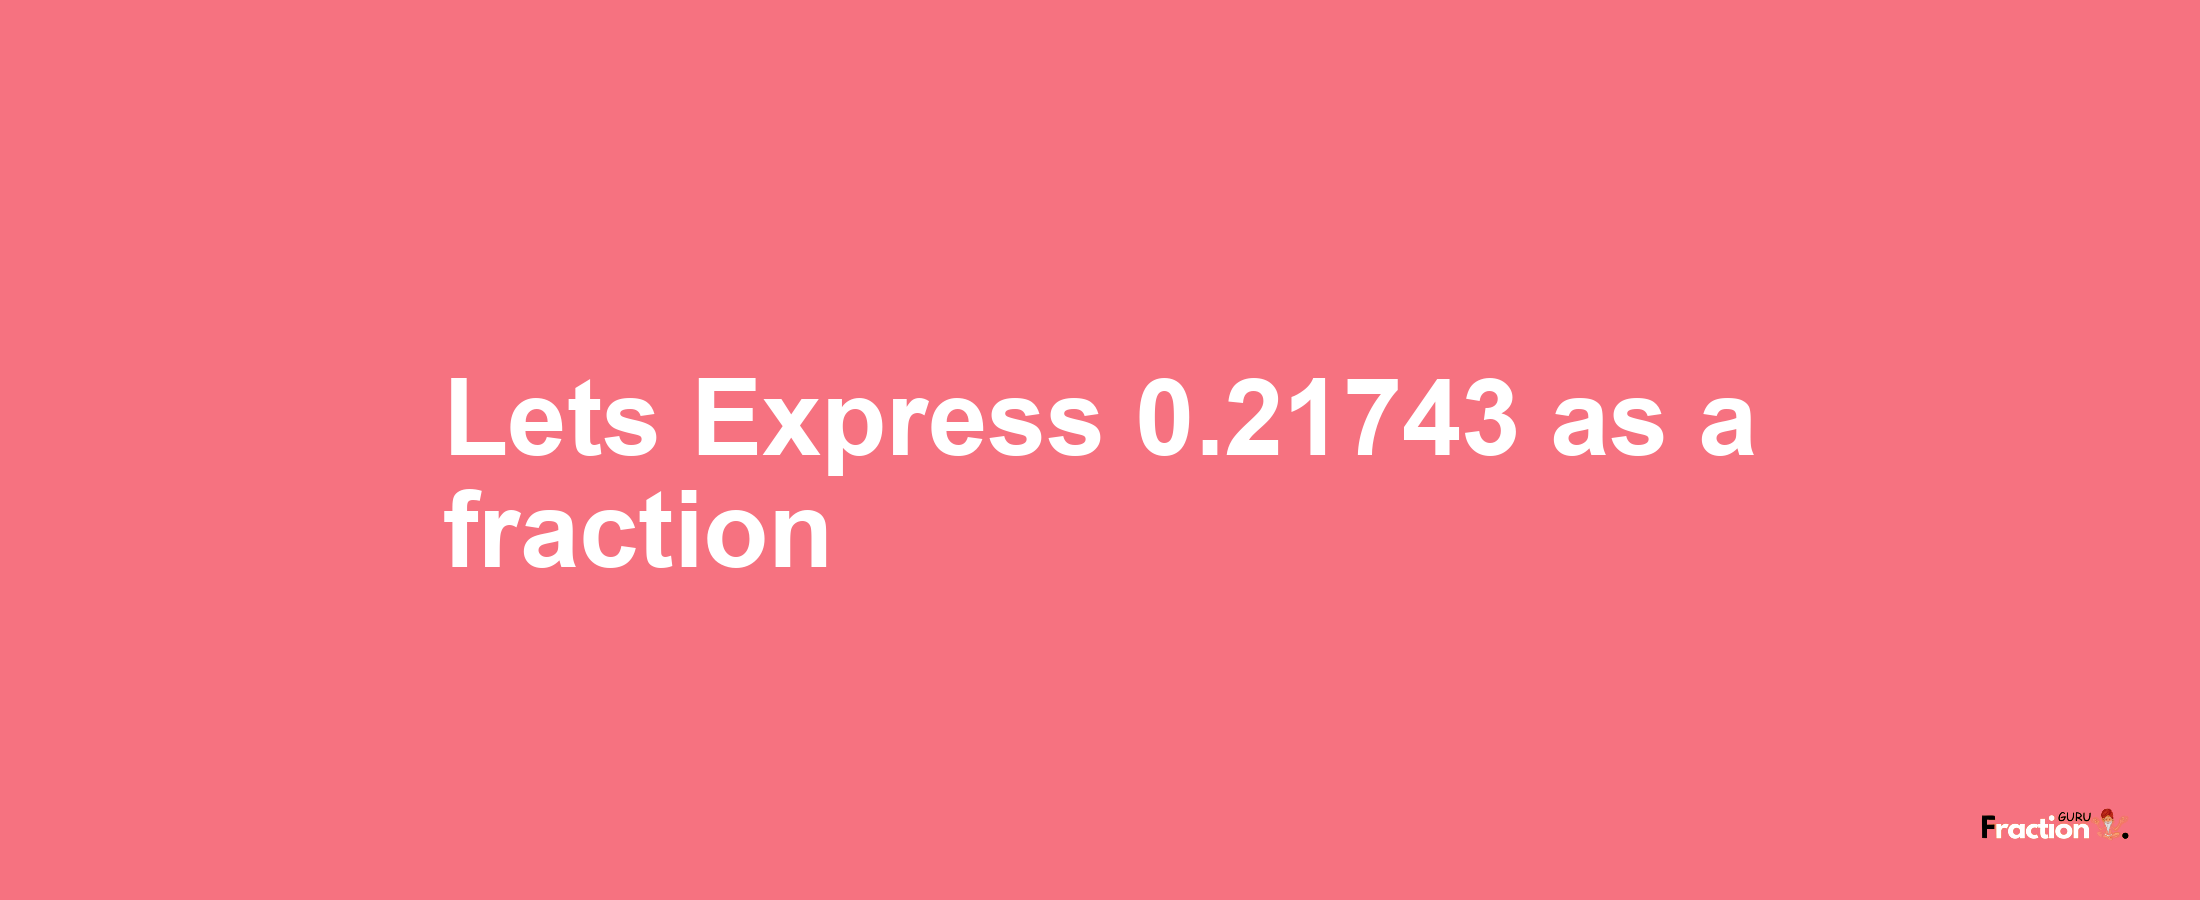 Lets Express 0.21743 as afraction